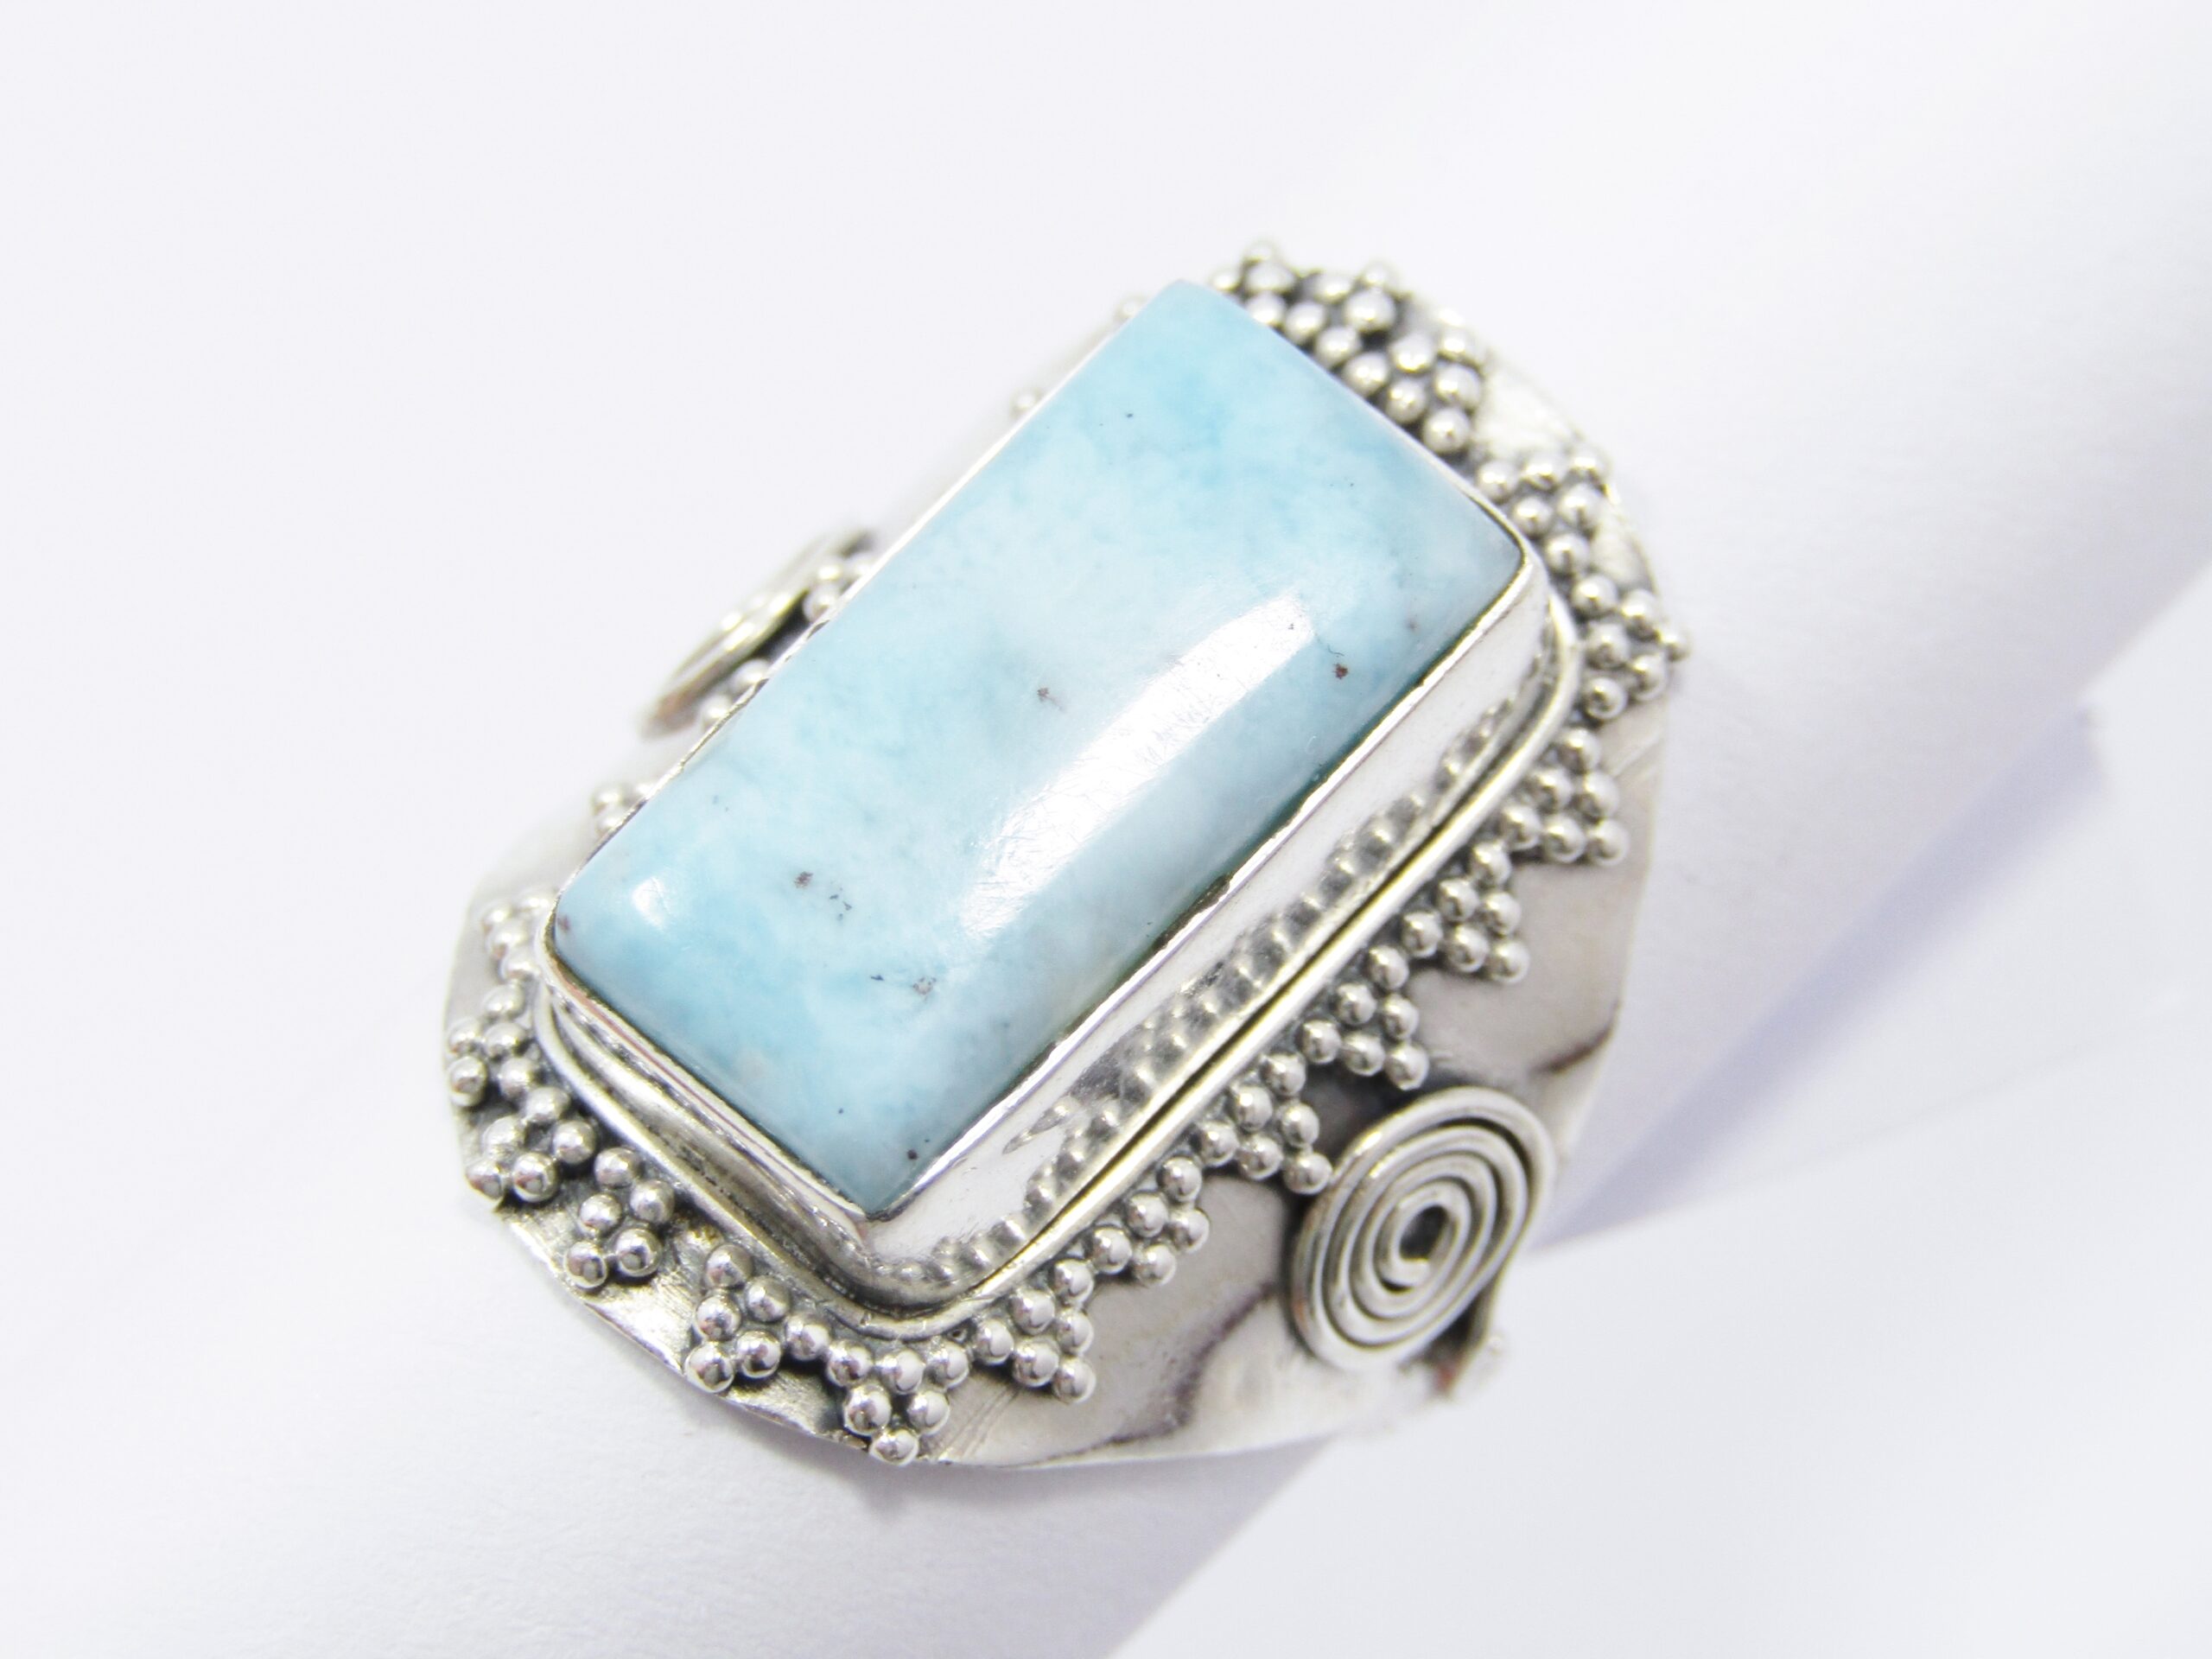 A Gorgeous Chunky Larimar Gemstone Ring in Sterling Silver.